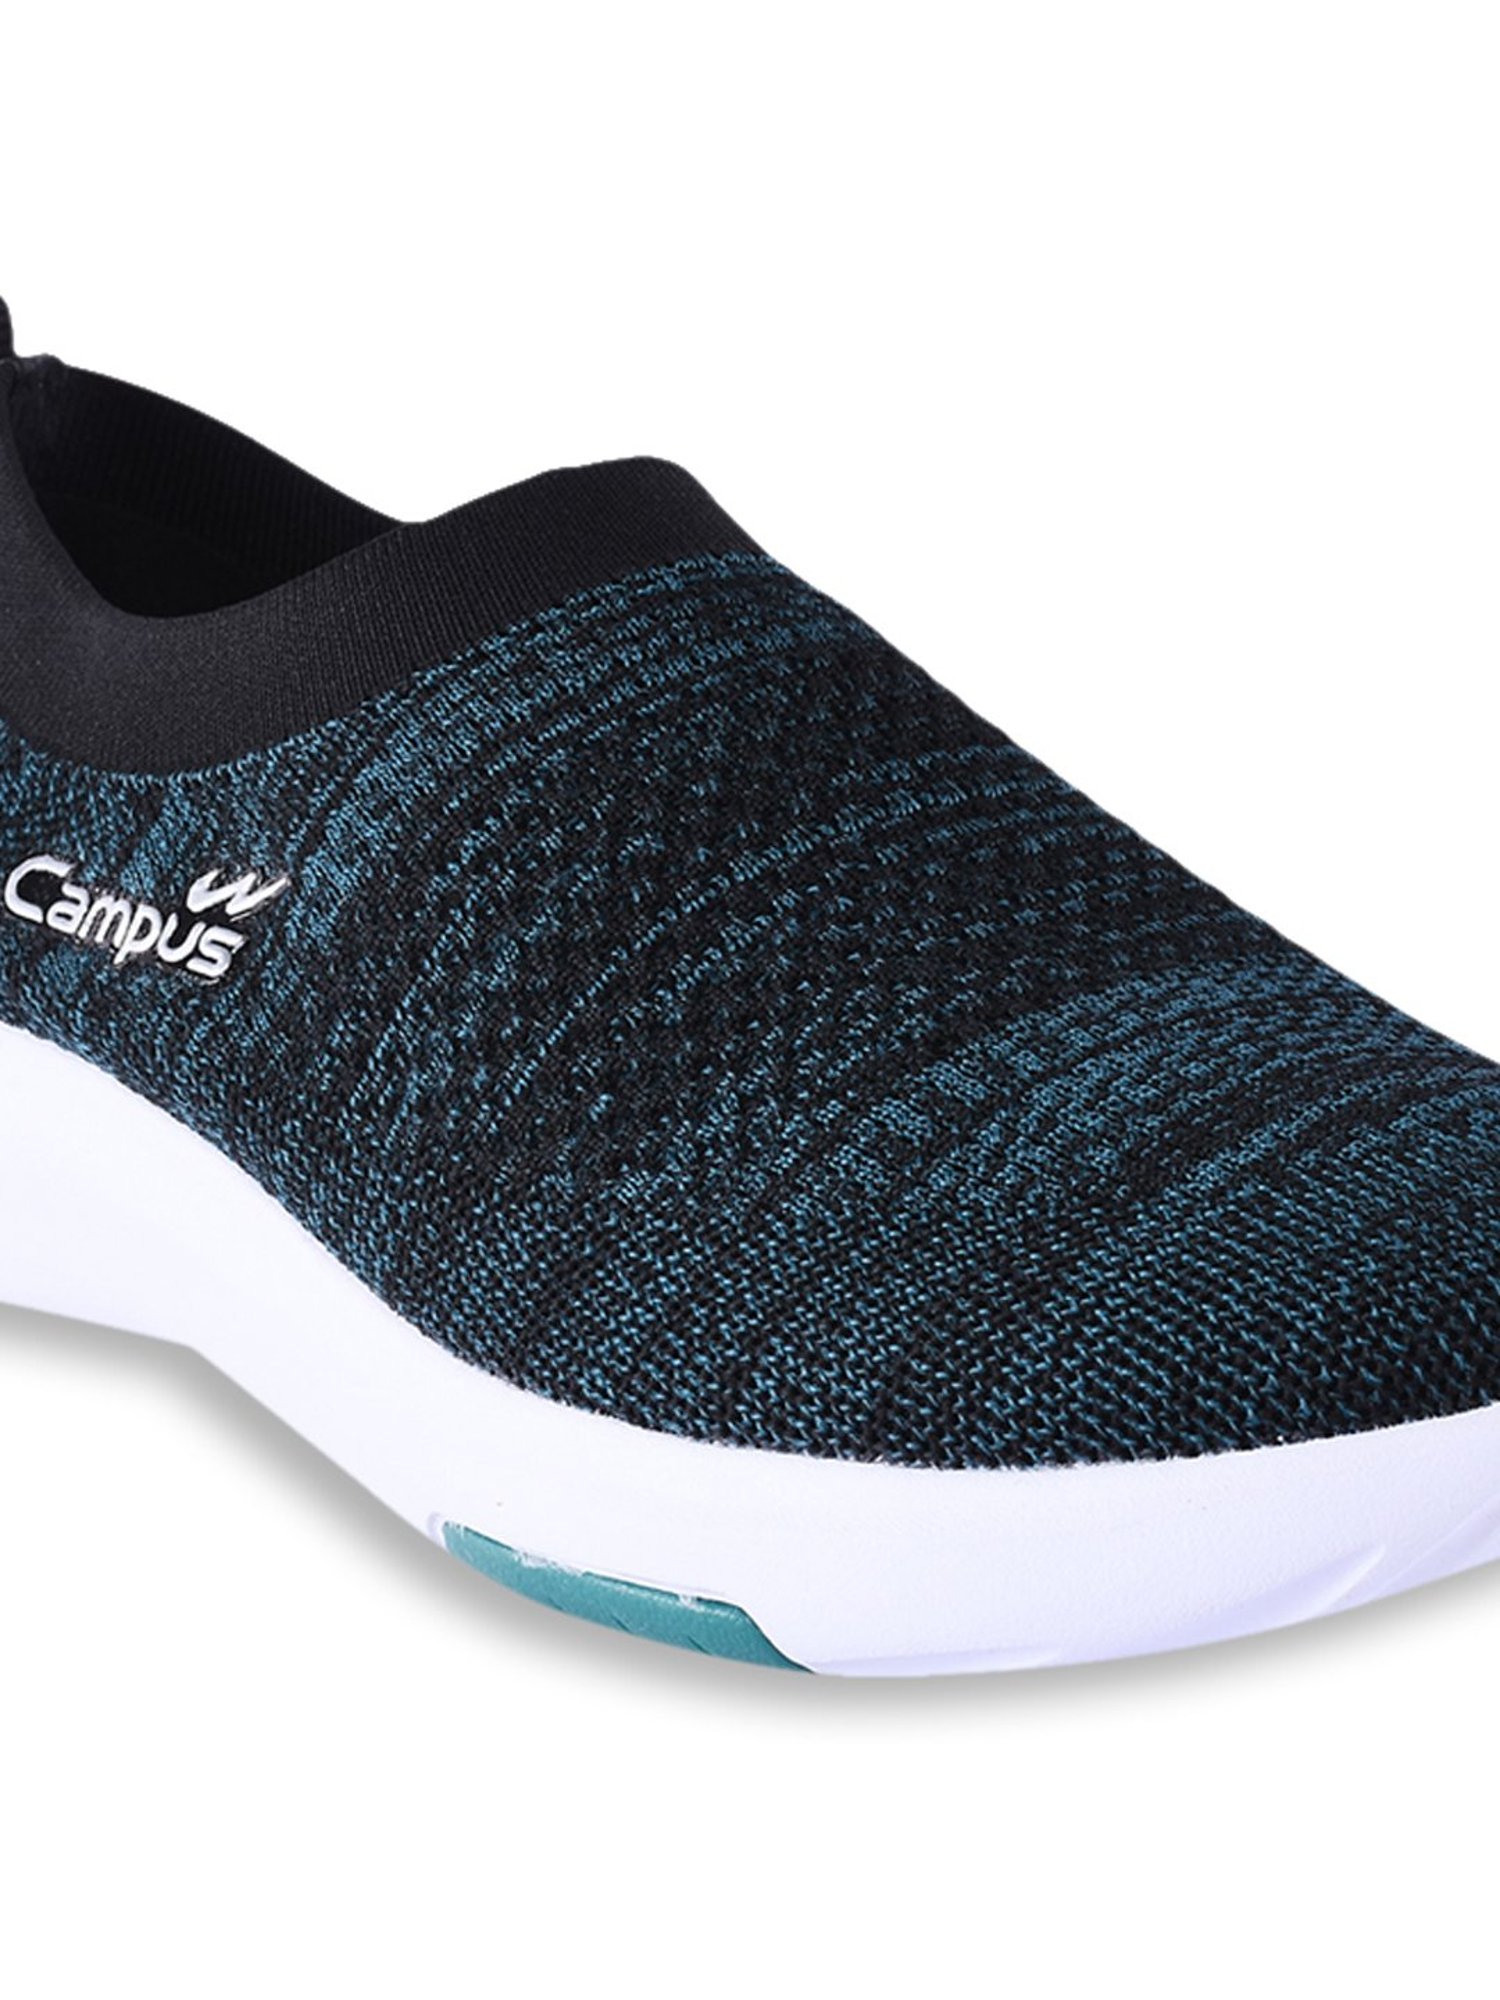 Blue \u0026 Black Running Shoes from Campus 